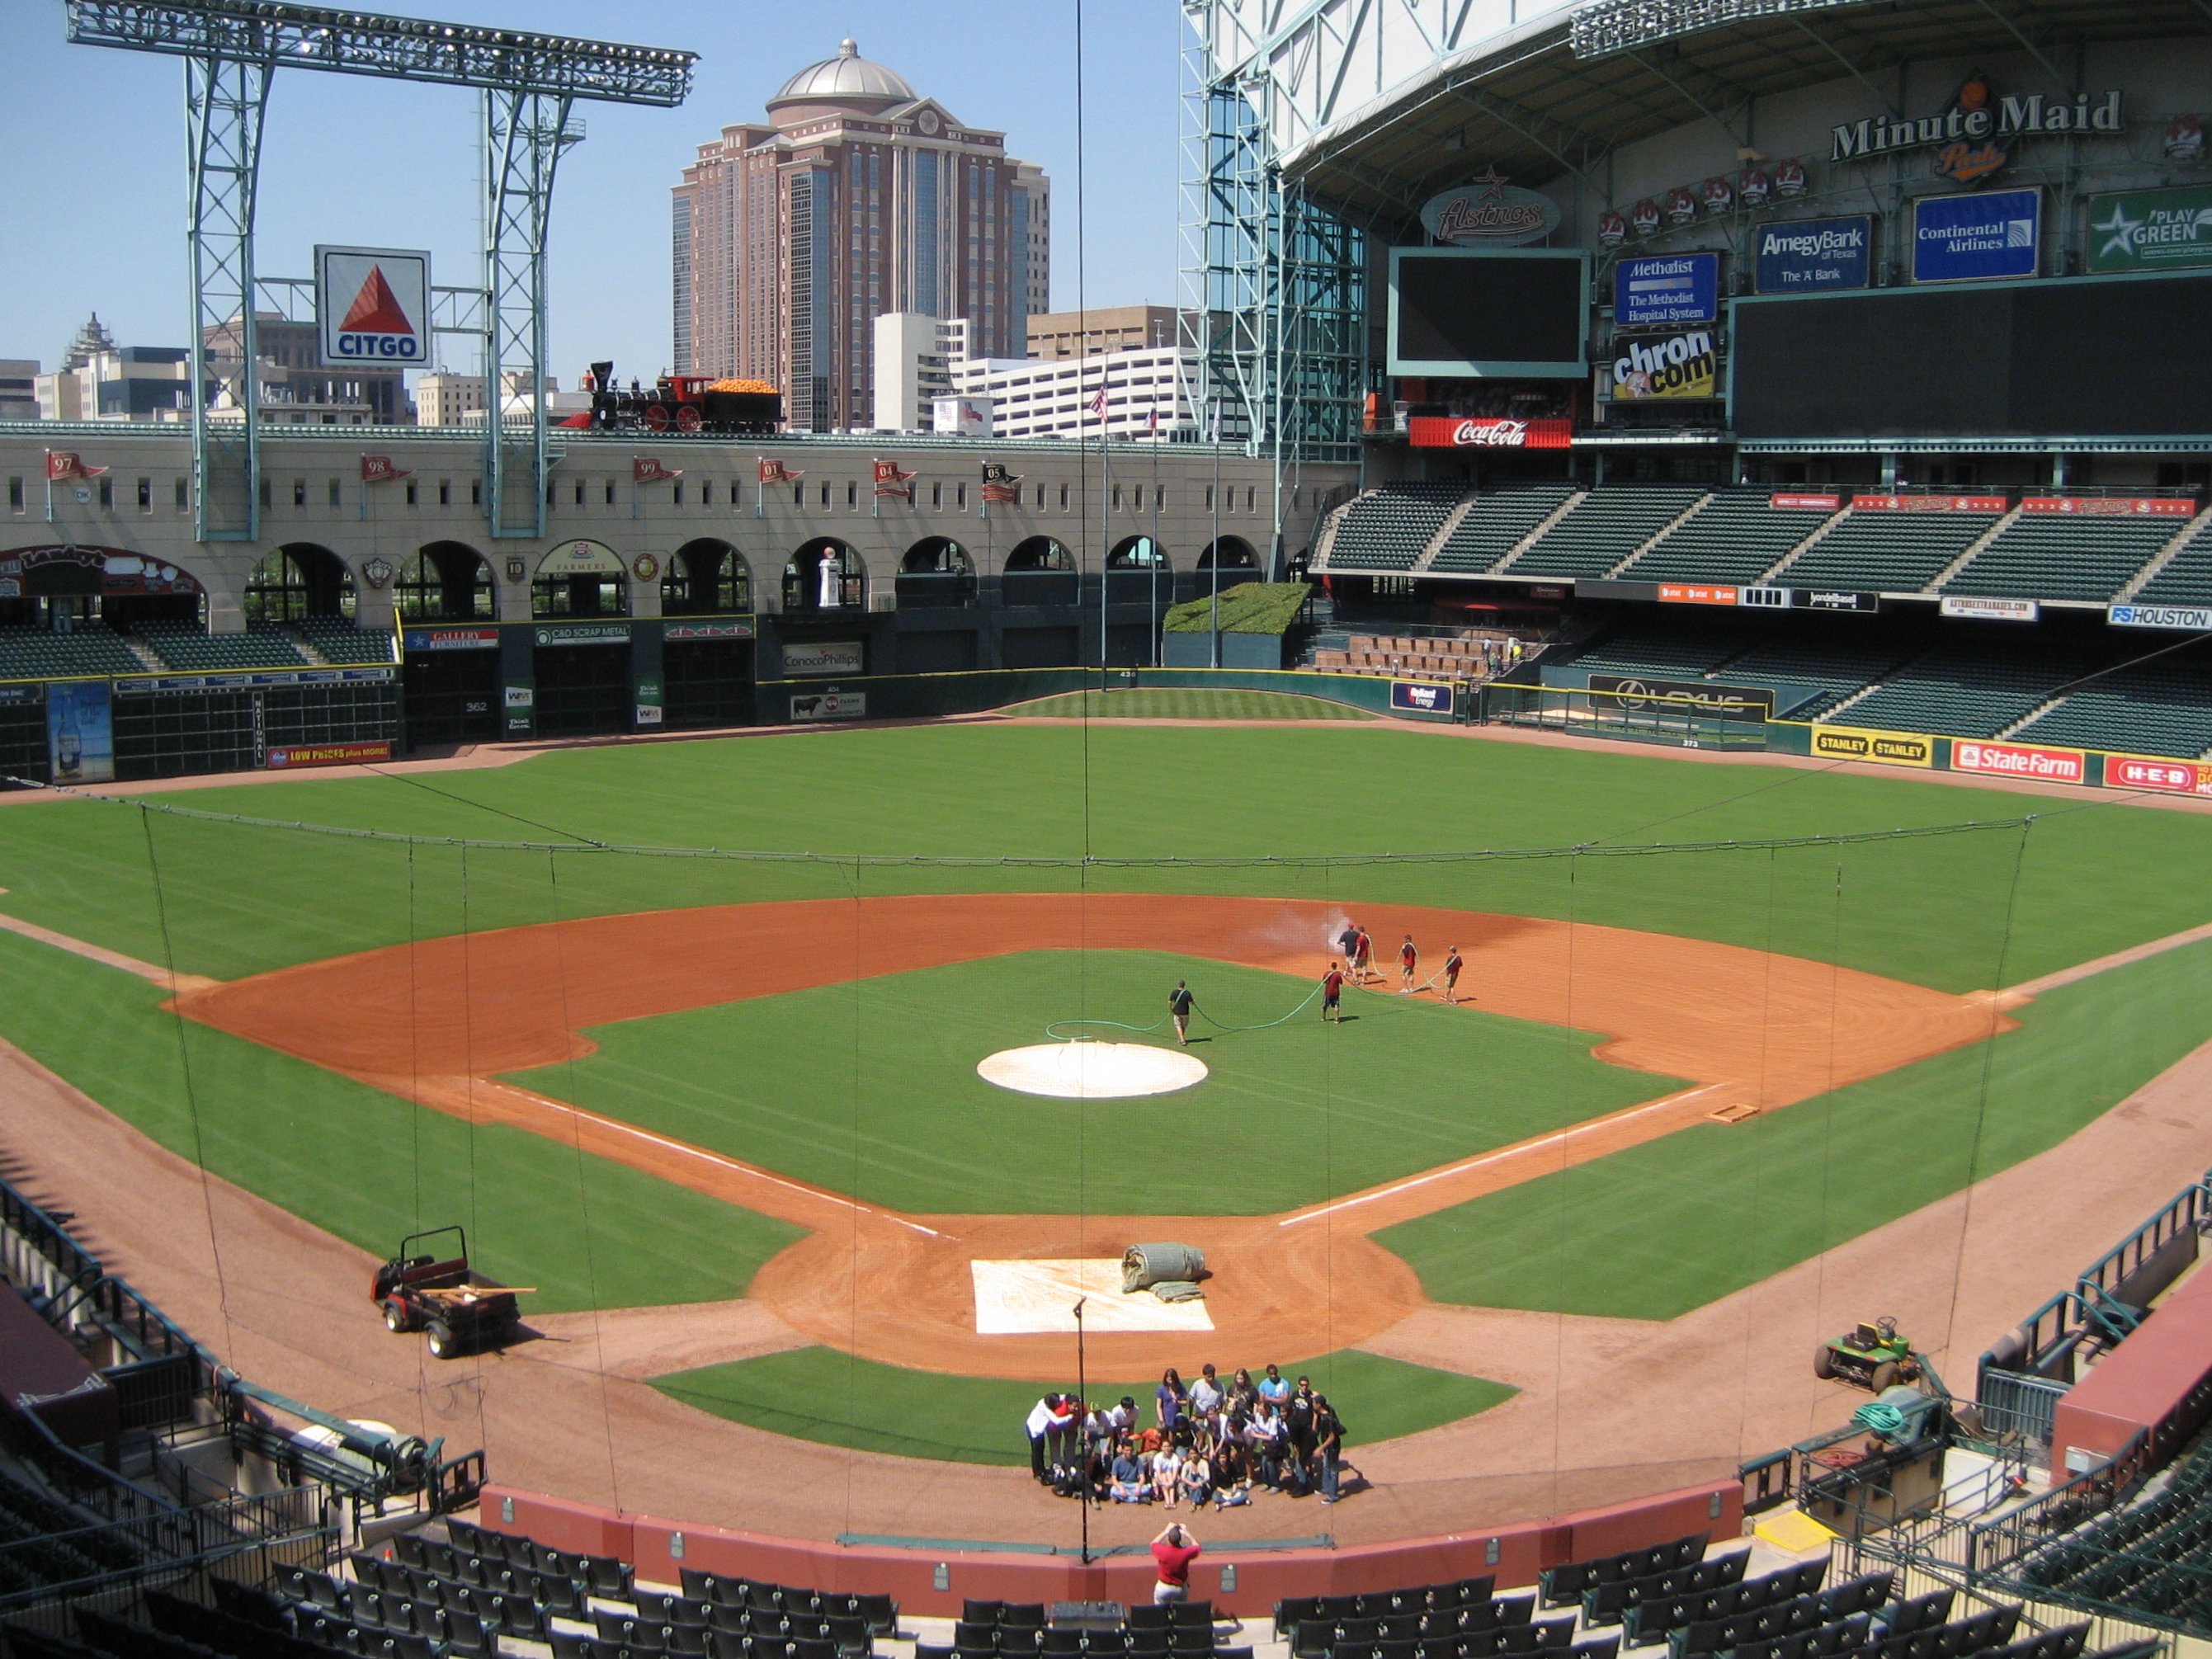 Minute Maid Park, home of the Houston Astros